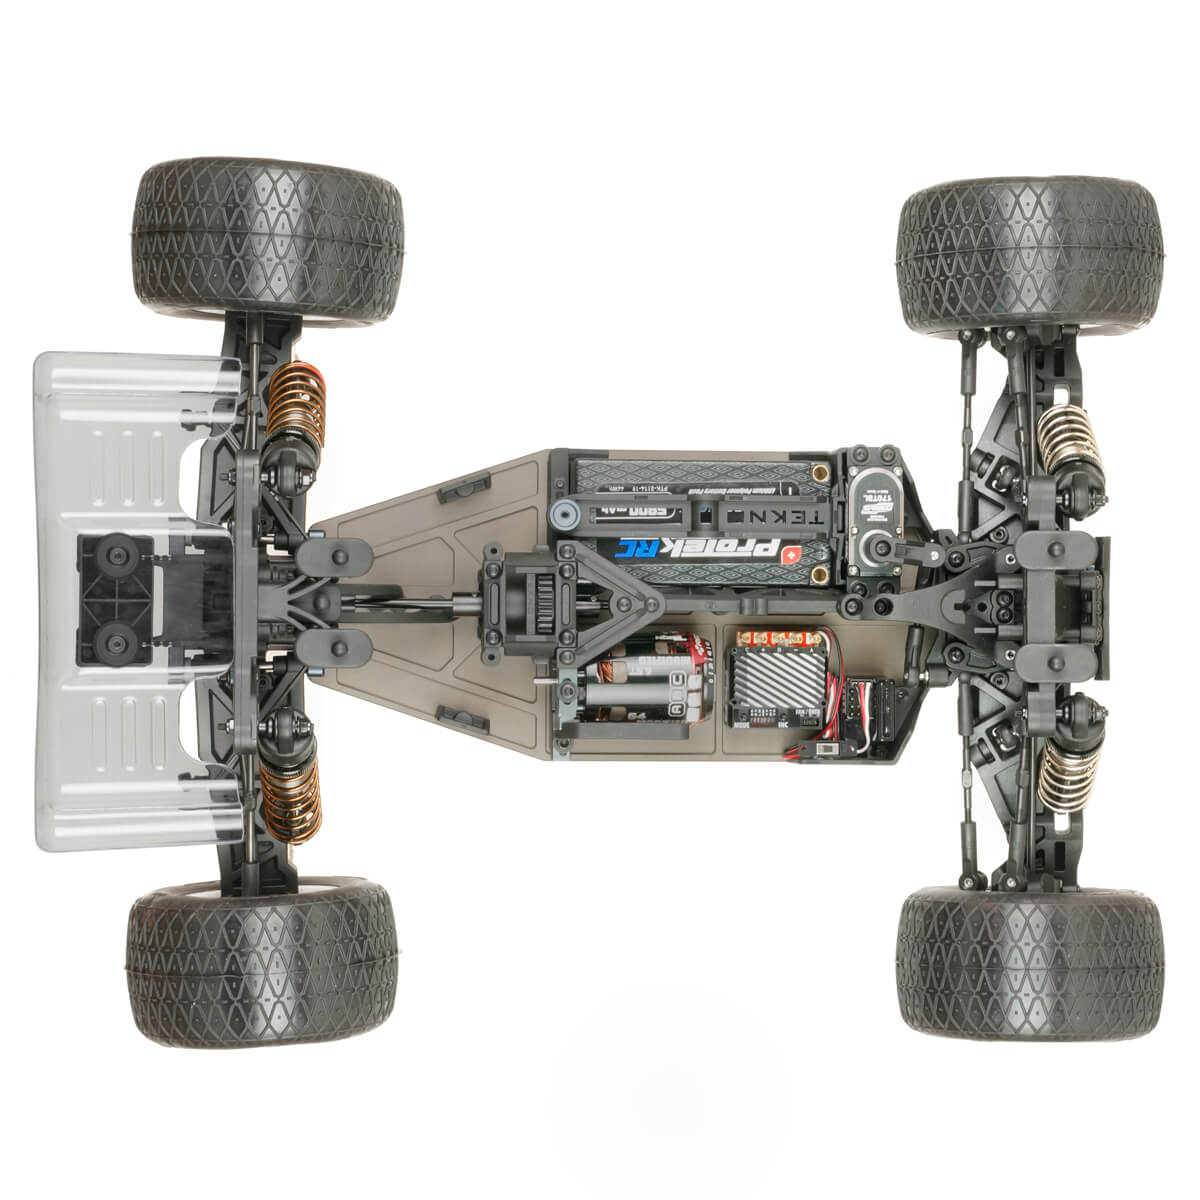 Tekno RC ET410.2 Truggy Kit - Top Chassis